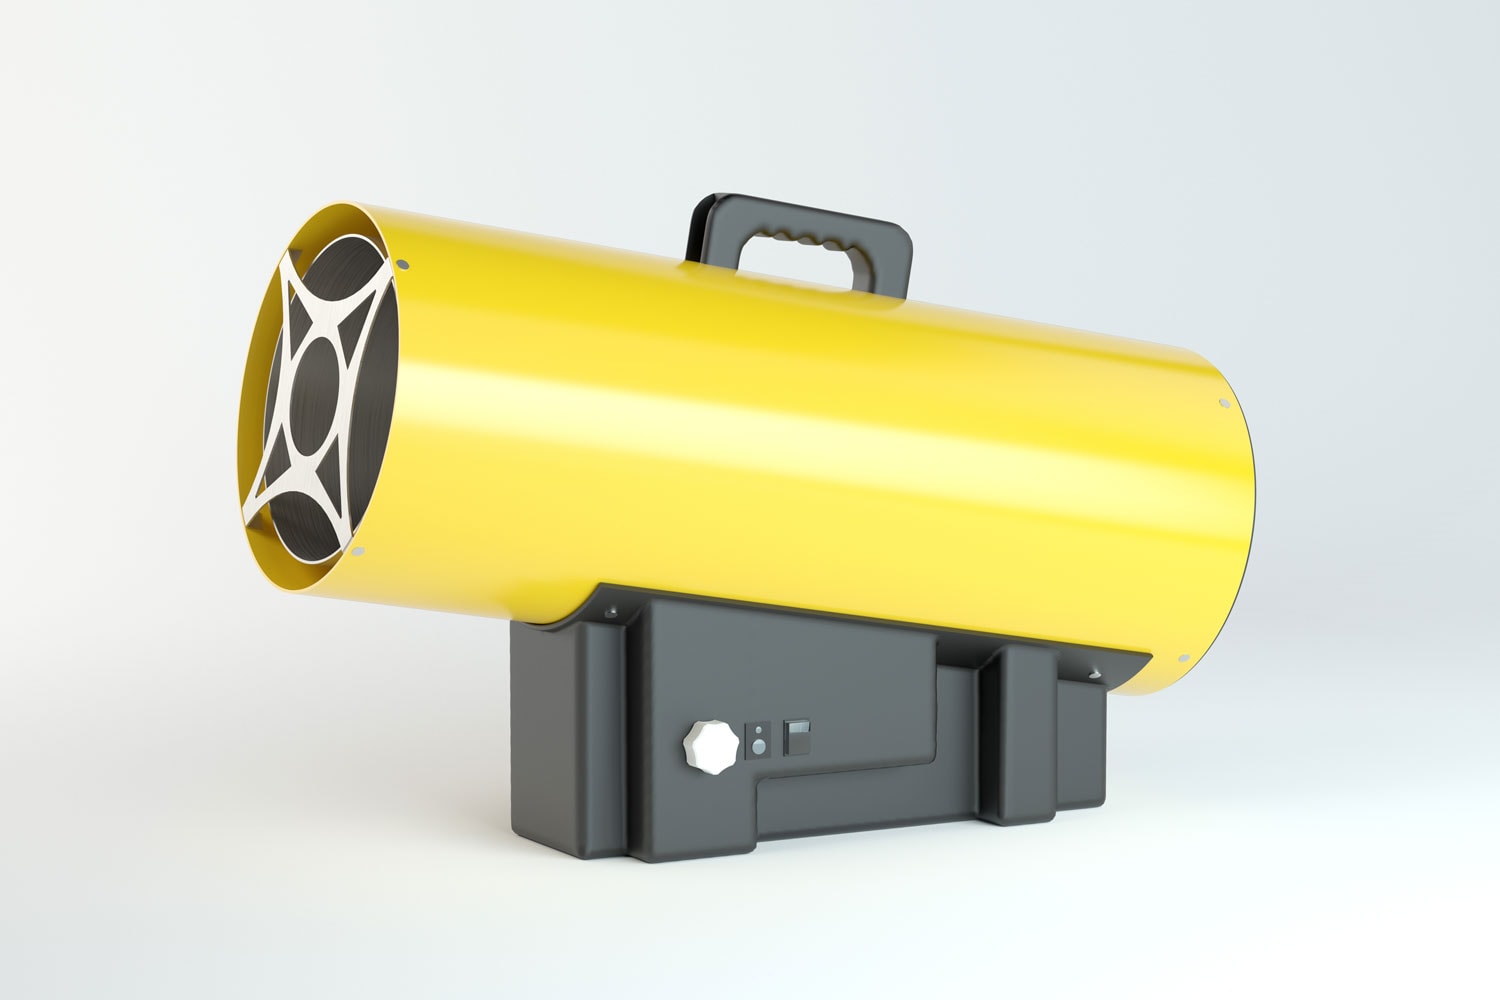 Yellow colored Torpedo heater on a white background